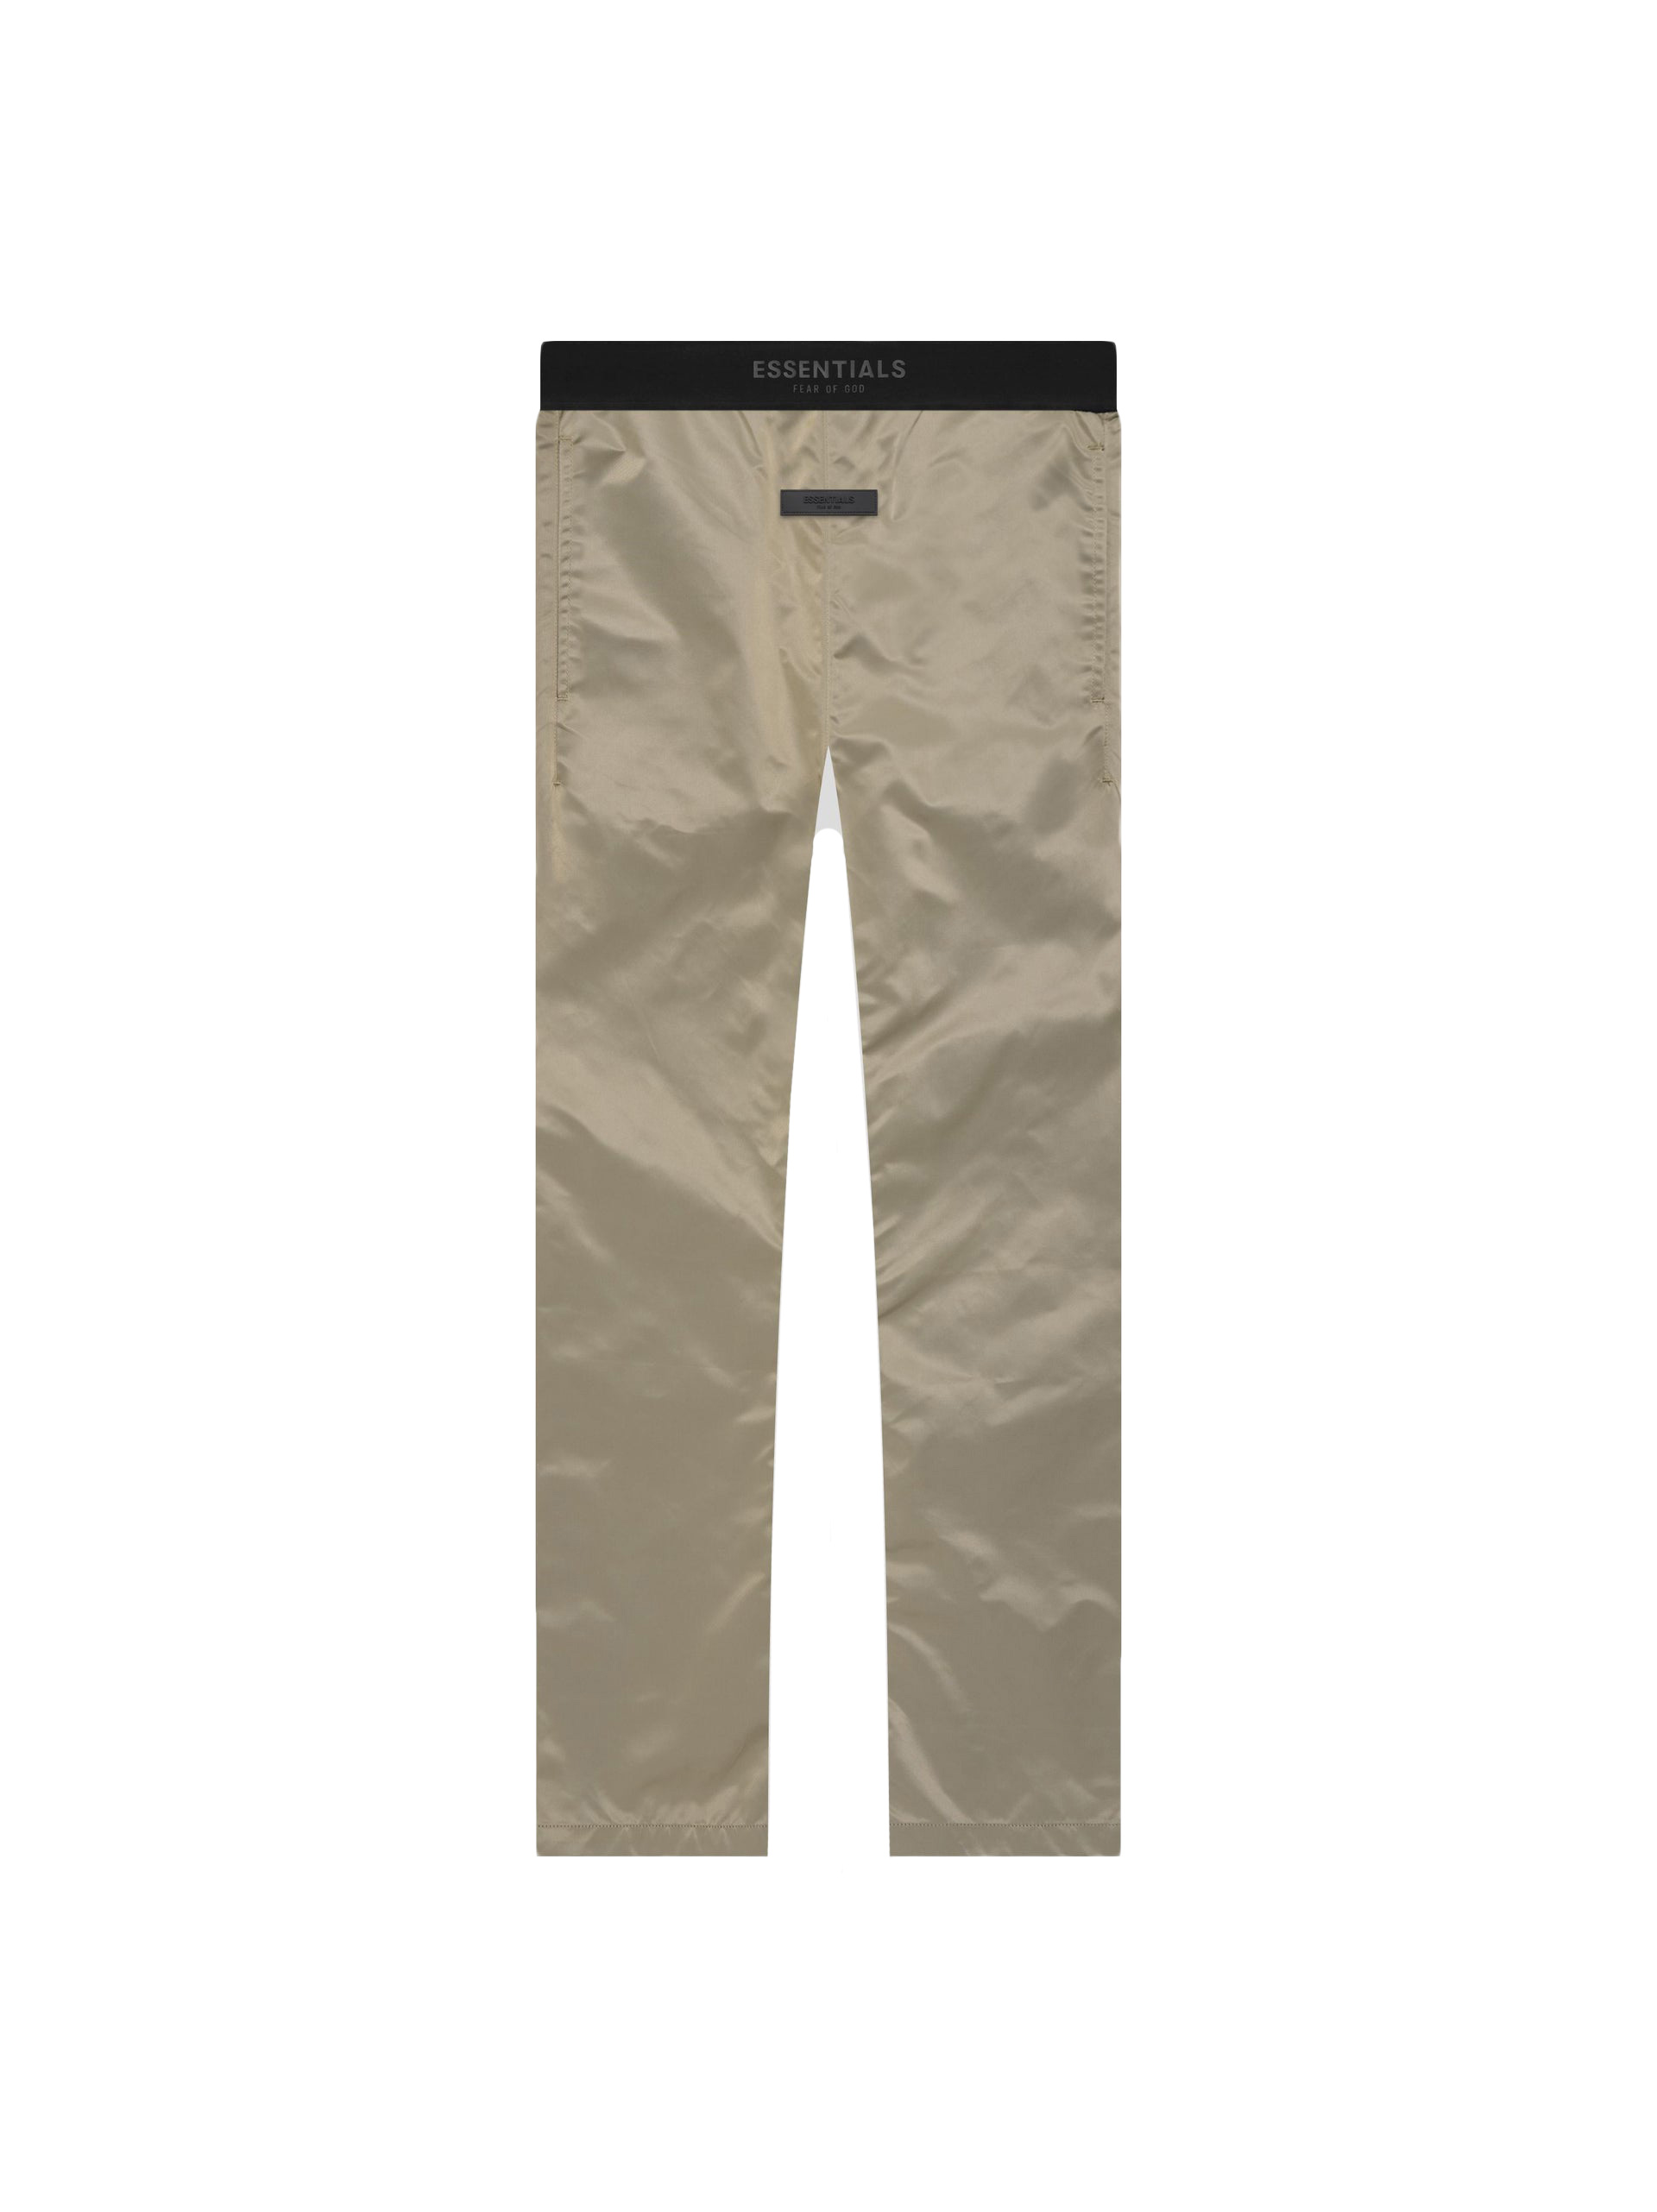 FEAR OF GOD ESSENTIALS Relaxed Trouser